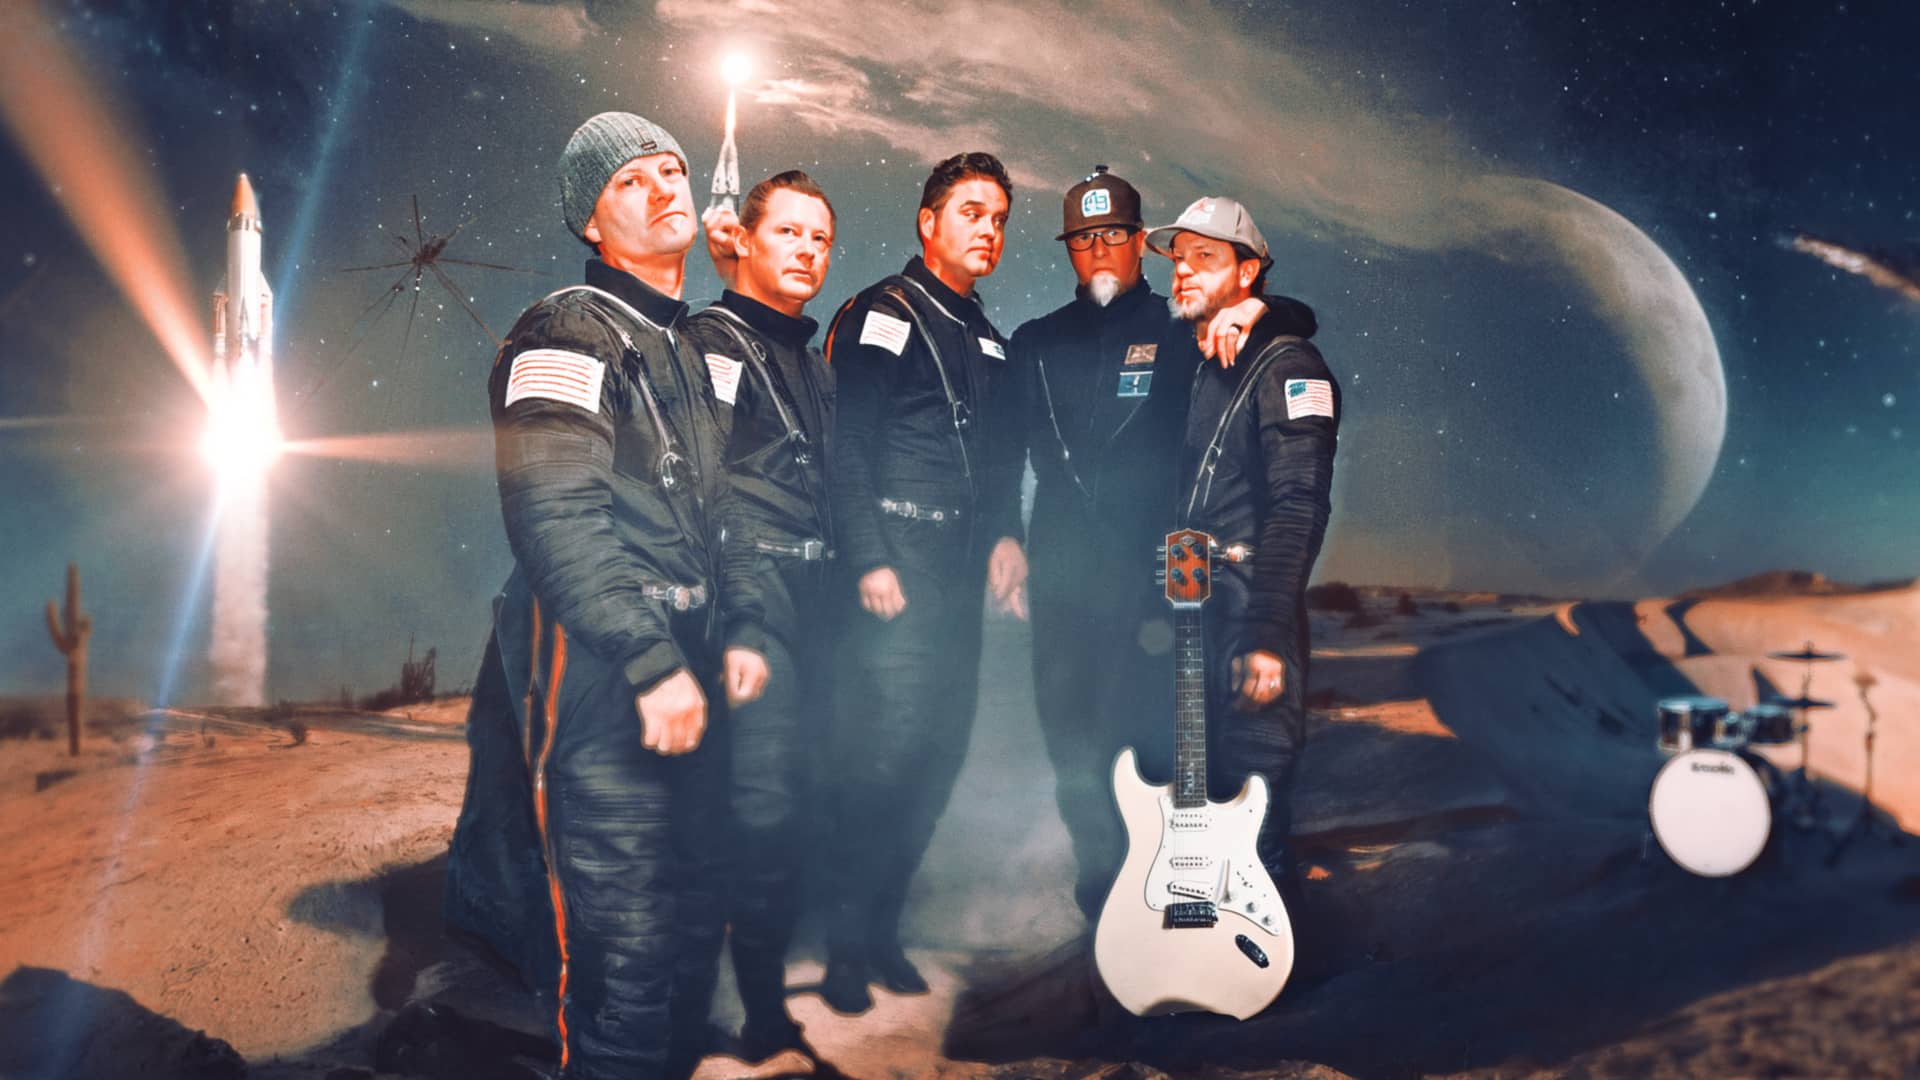 Band members in astronaut gear in desert with rocket and moon.